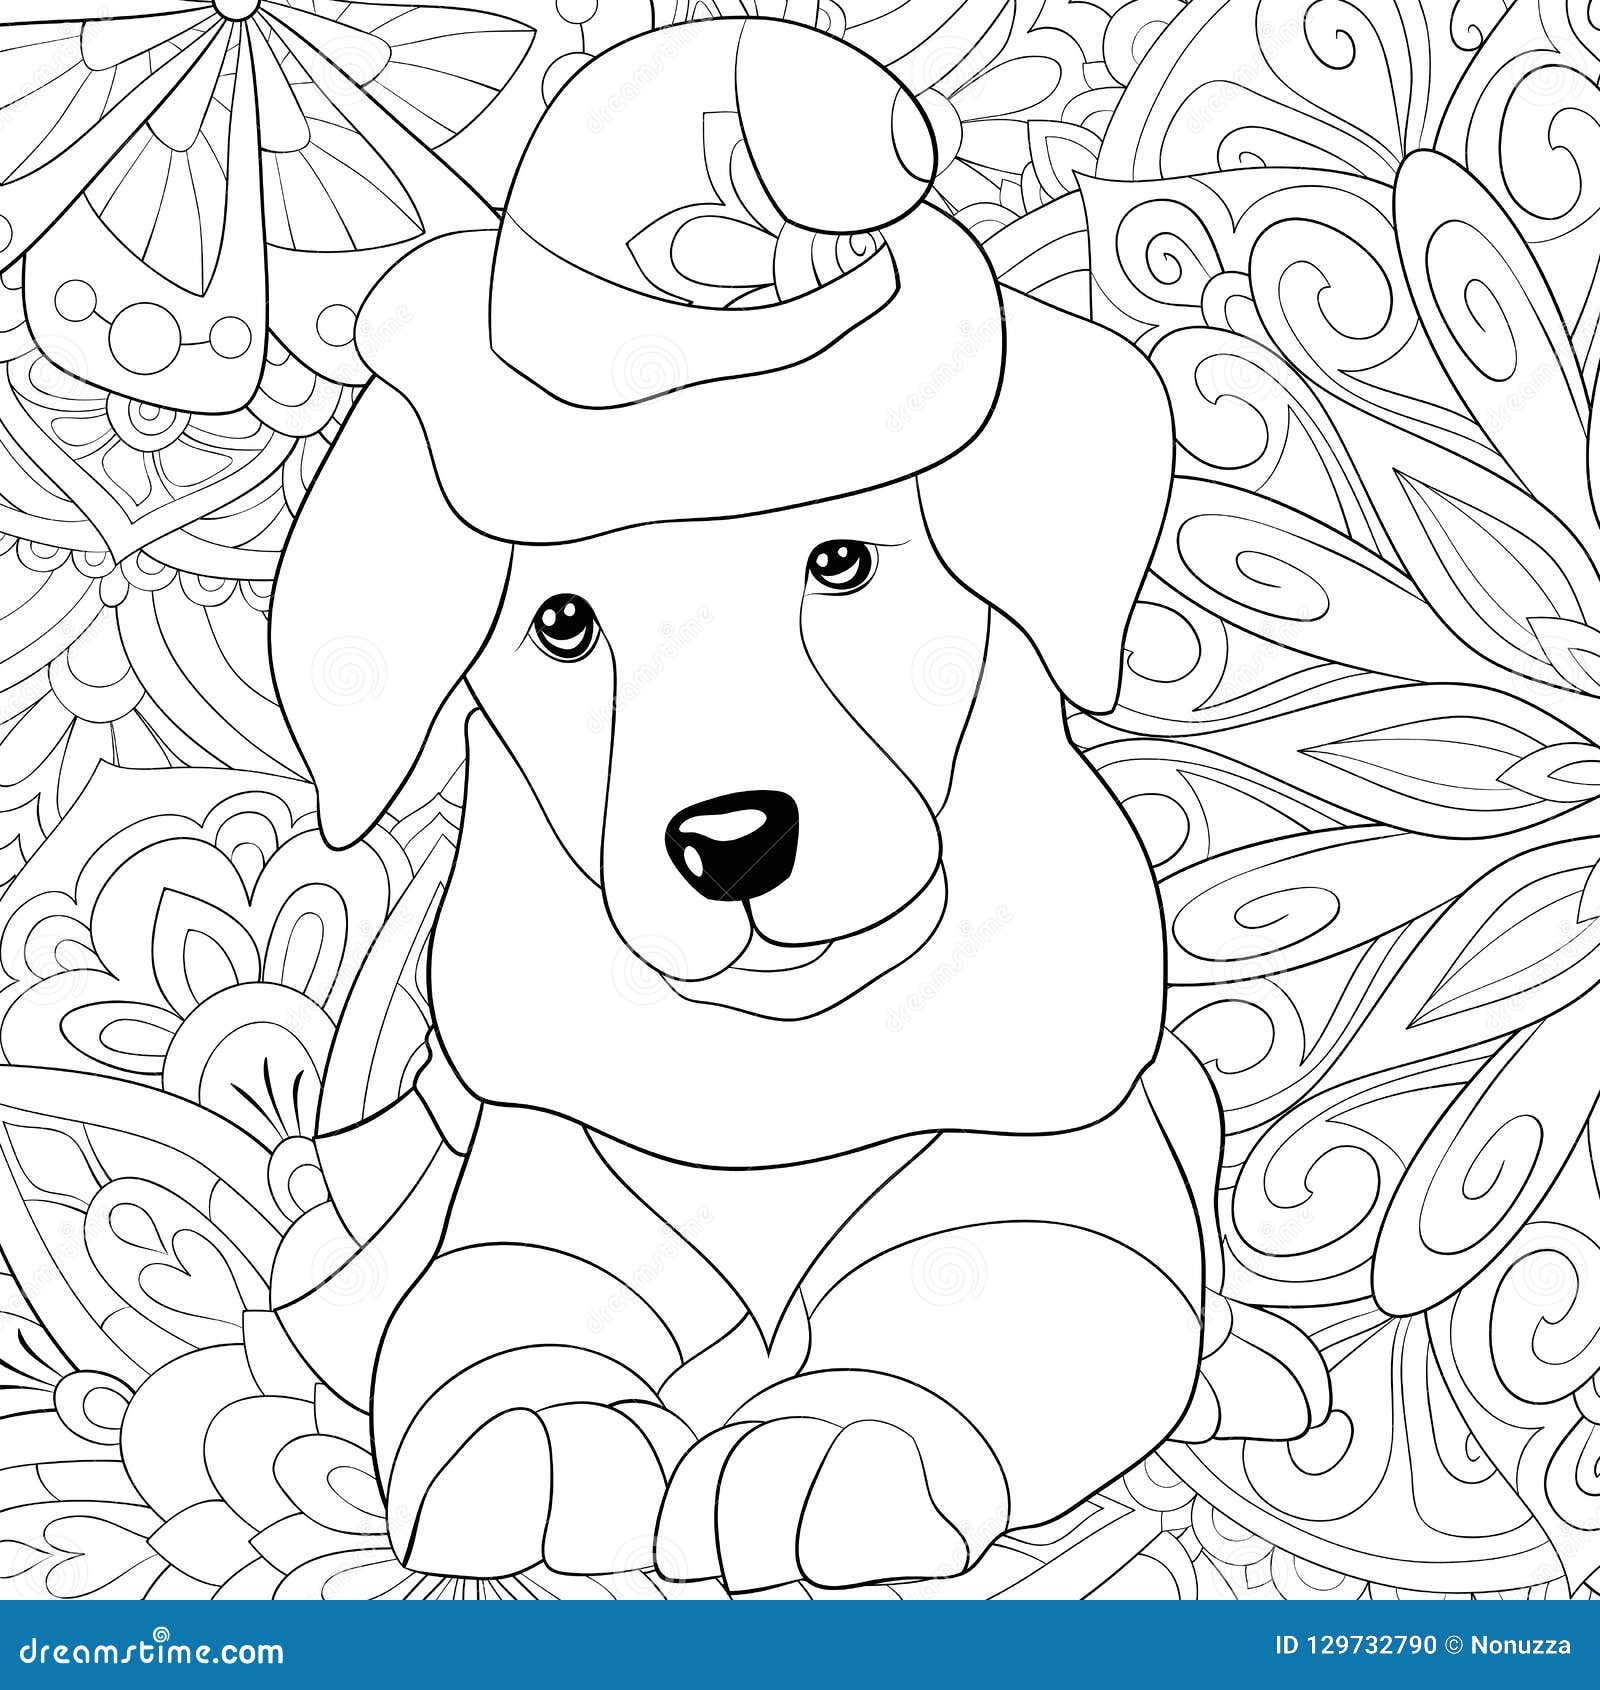 Adult Coloring Book,page a Cute Dog Image for Relaxing Activity.Zen Art ...